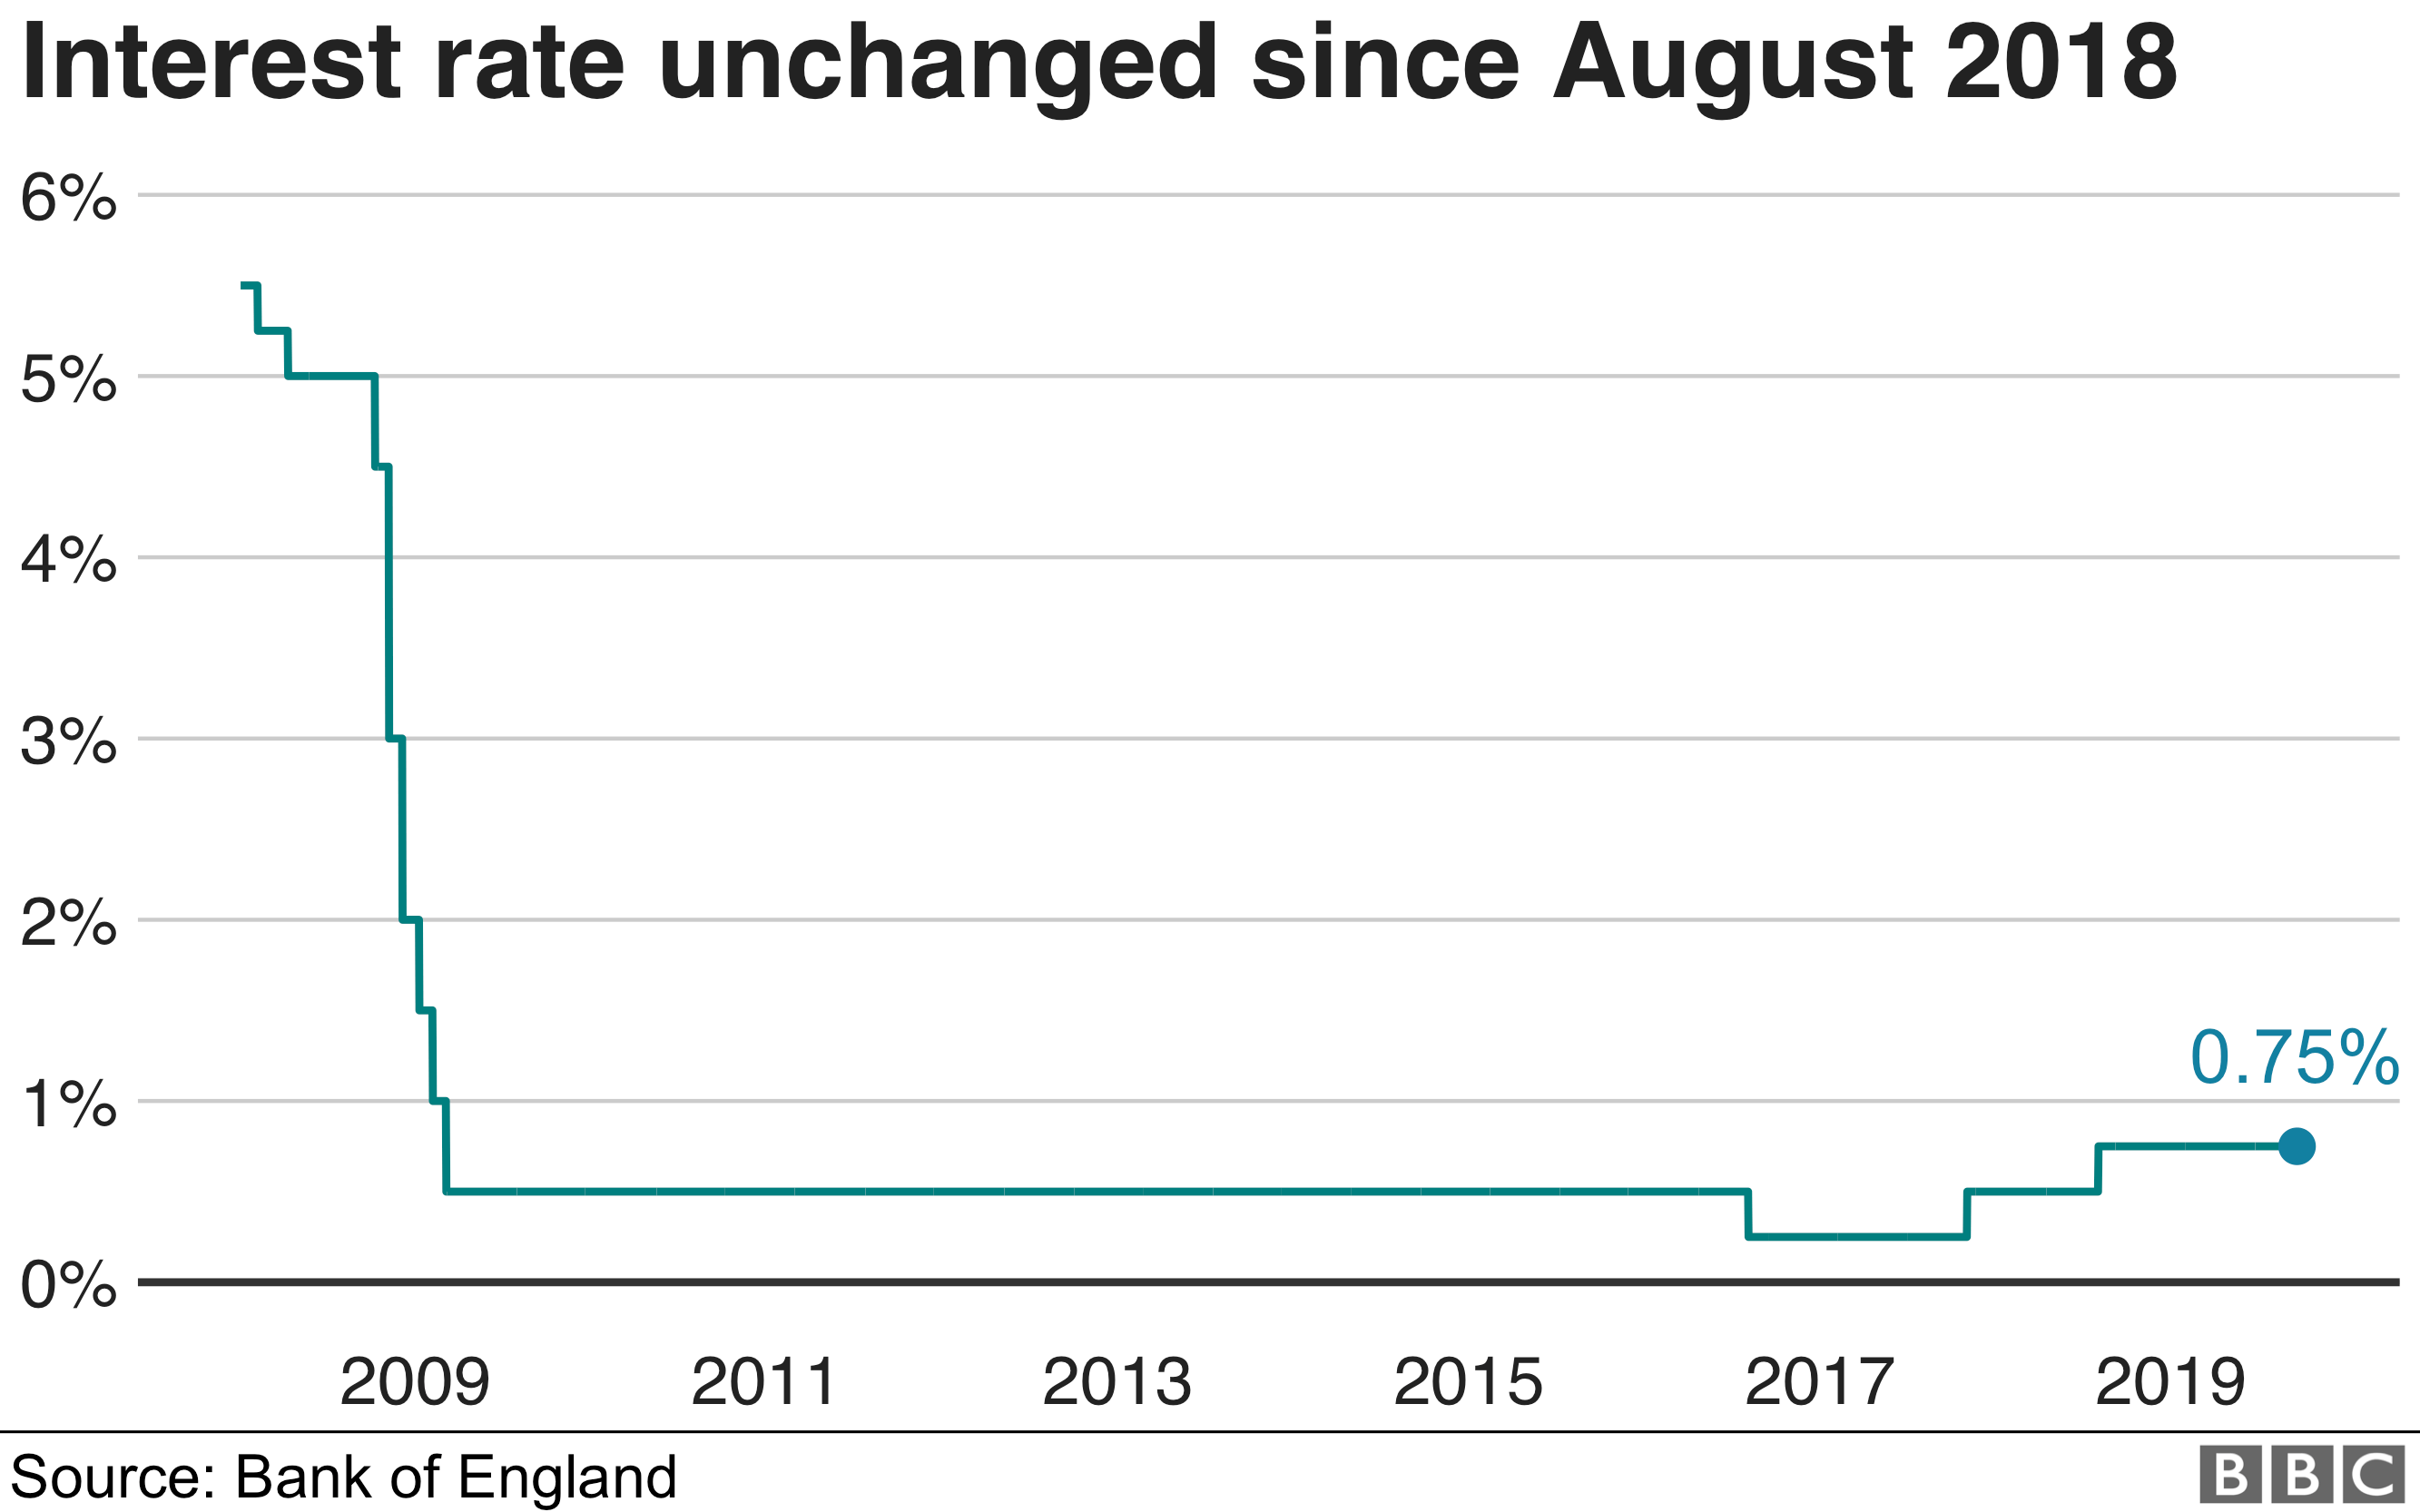 BBC graph showing UK interest rates unchanged since August 2018